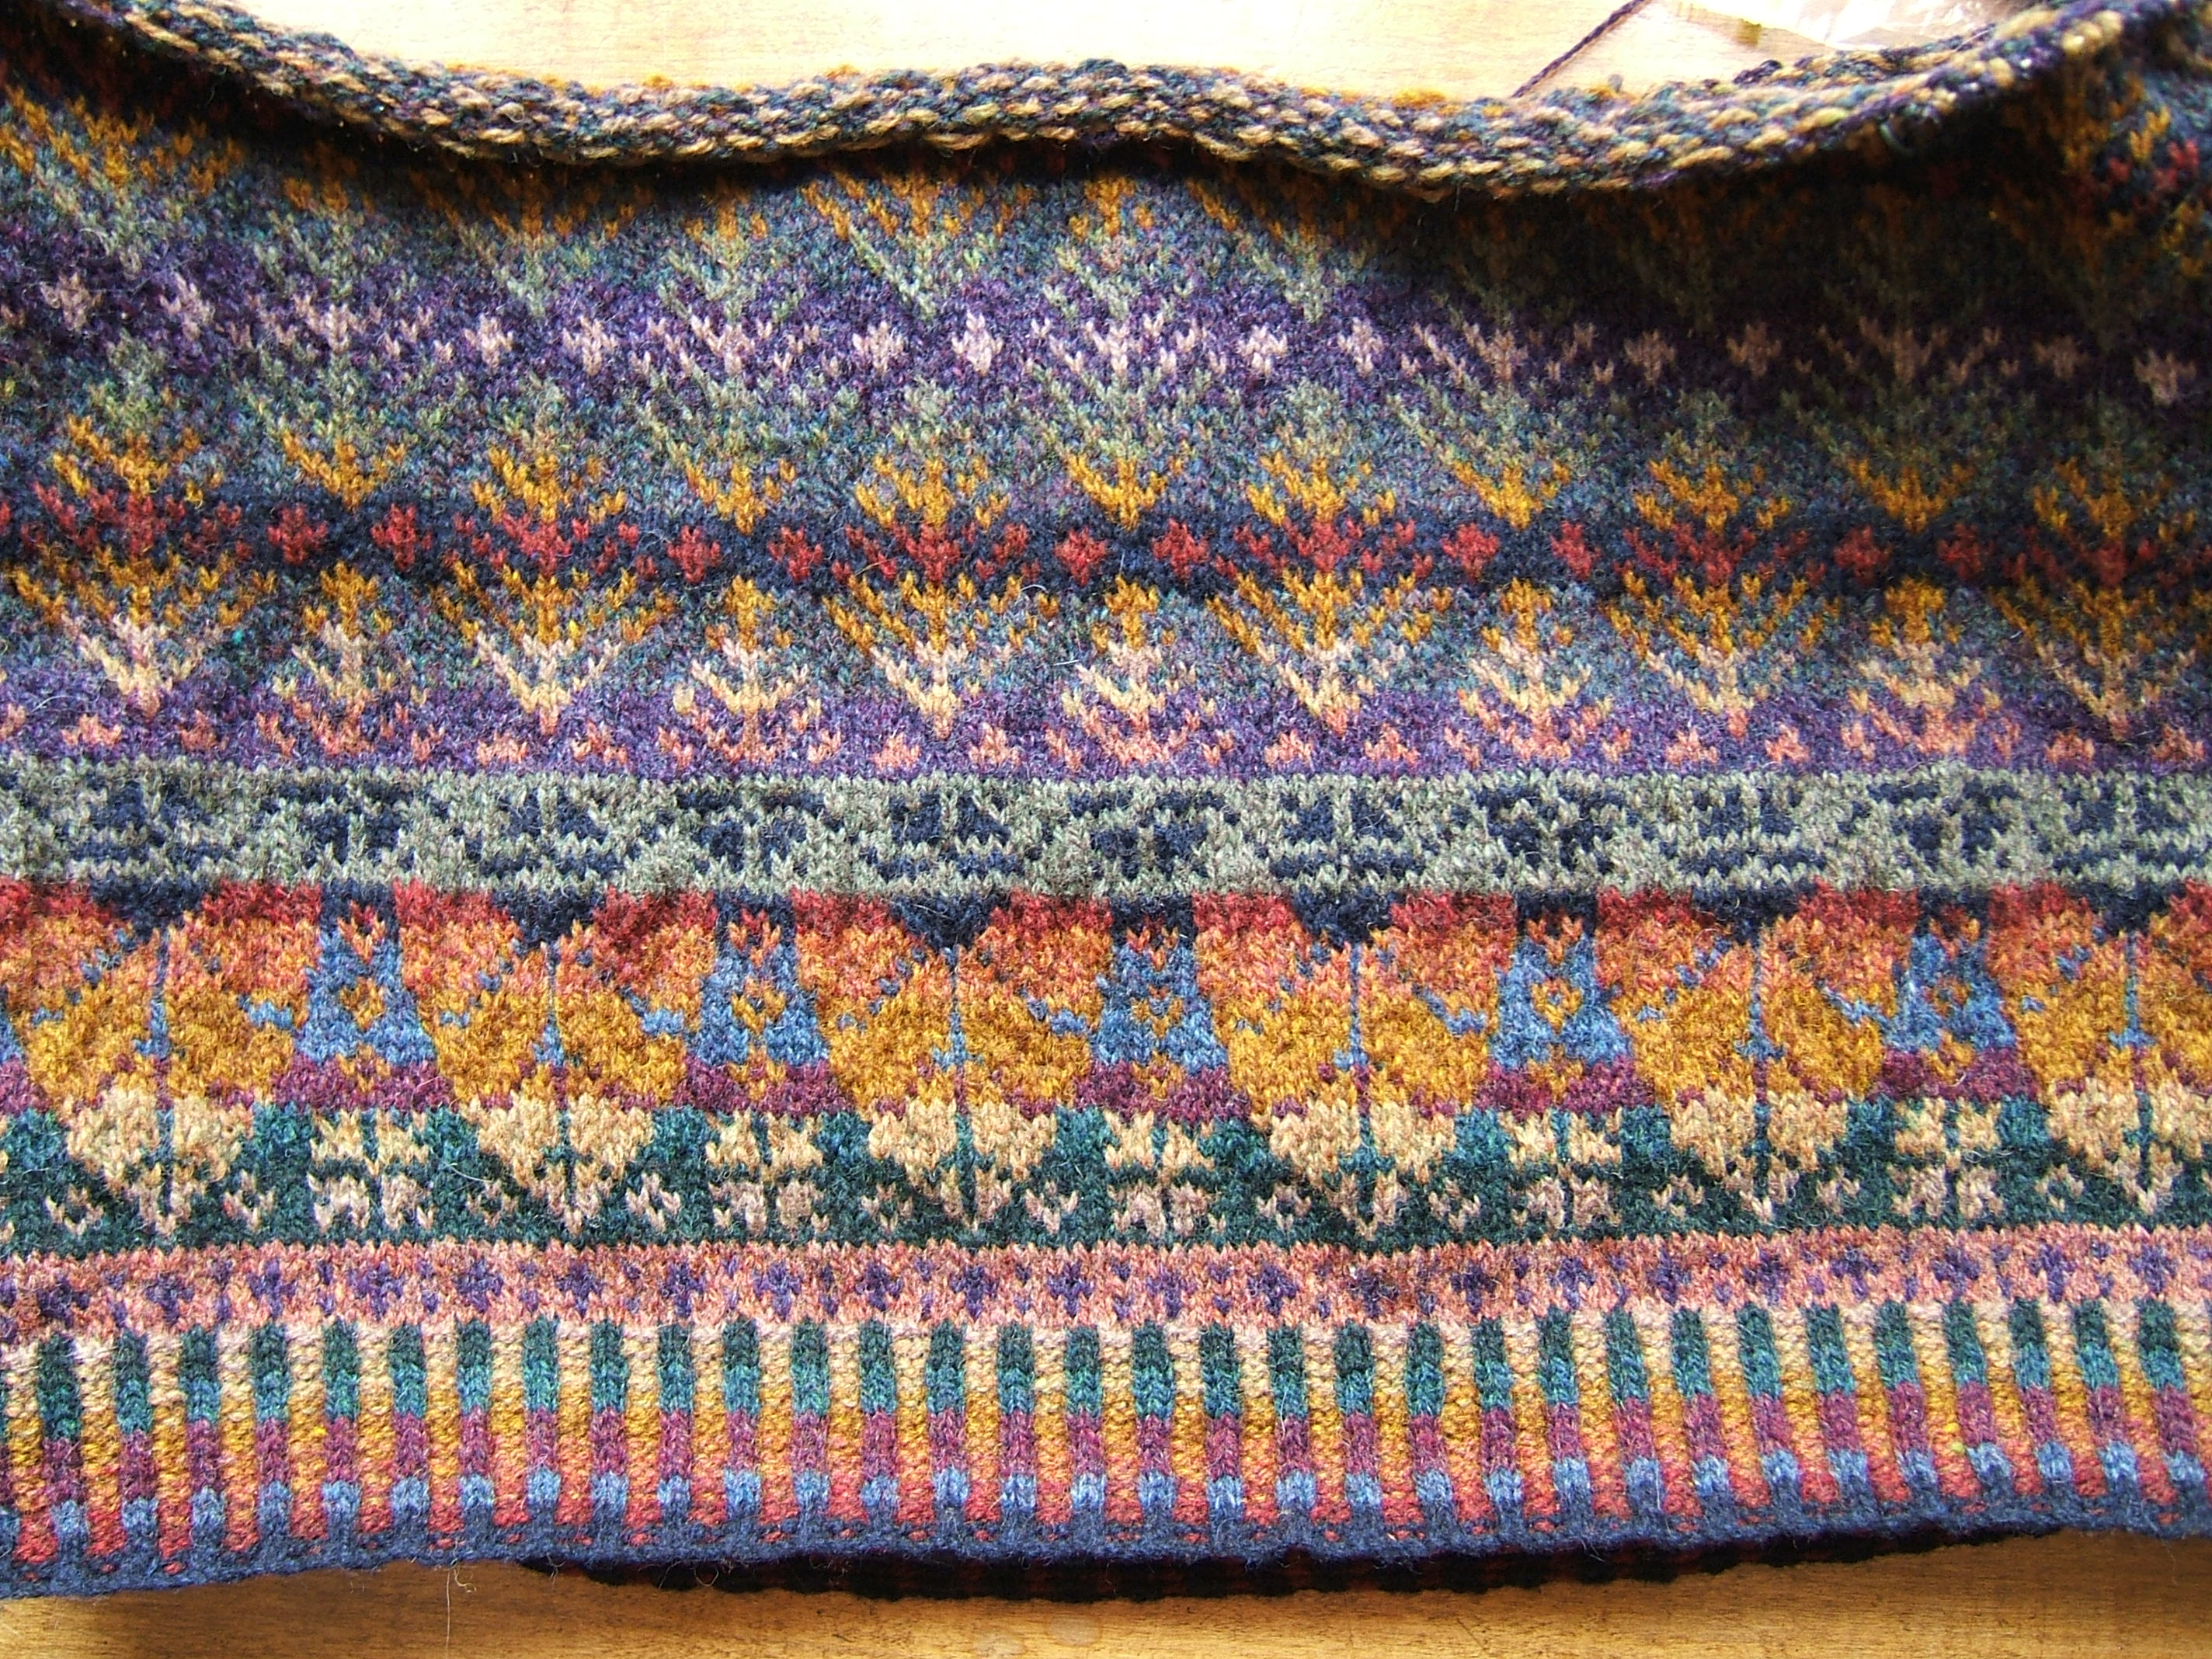 Fair isle knitting technique for the experts